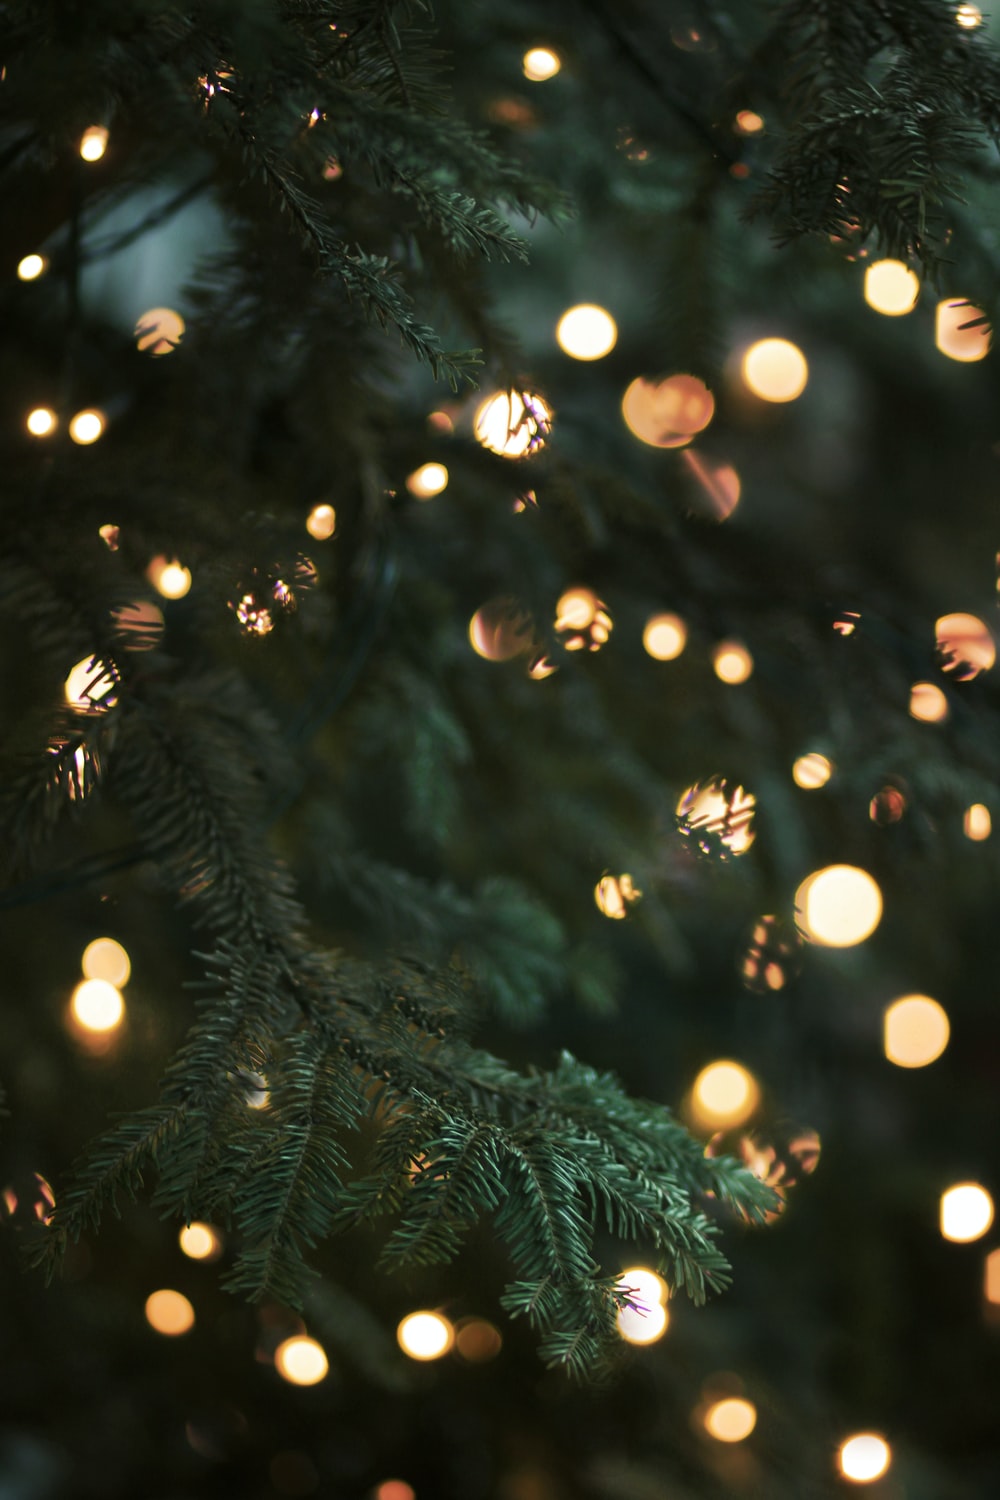 Christmas Tree Picture [HQ]. Download Free Image